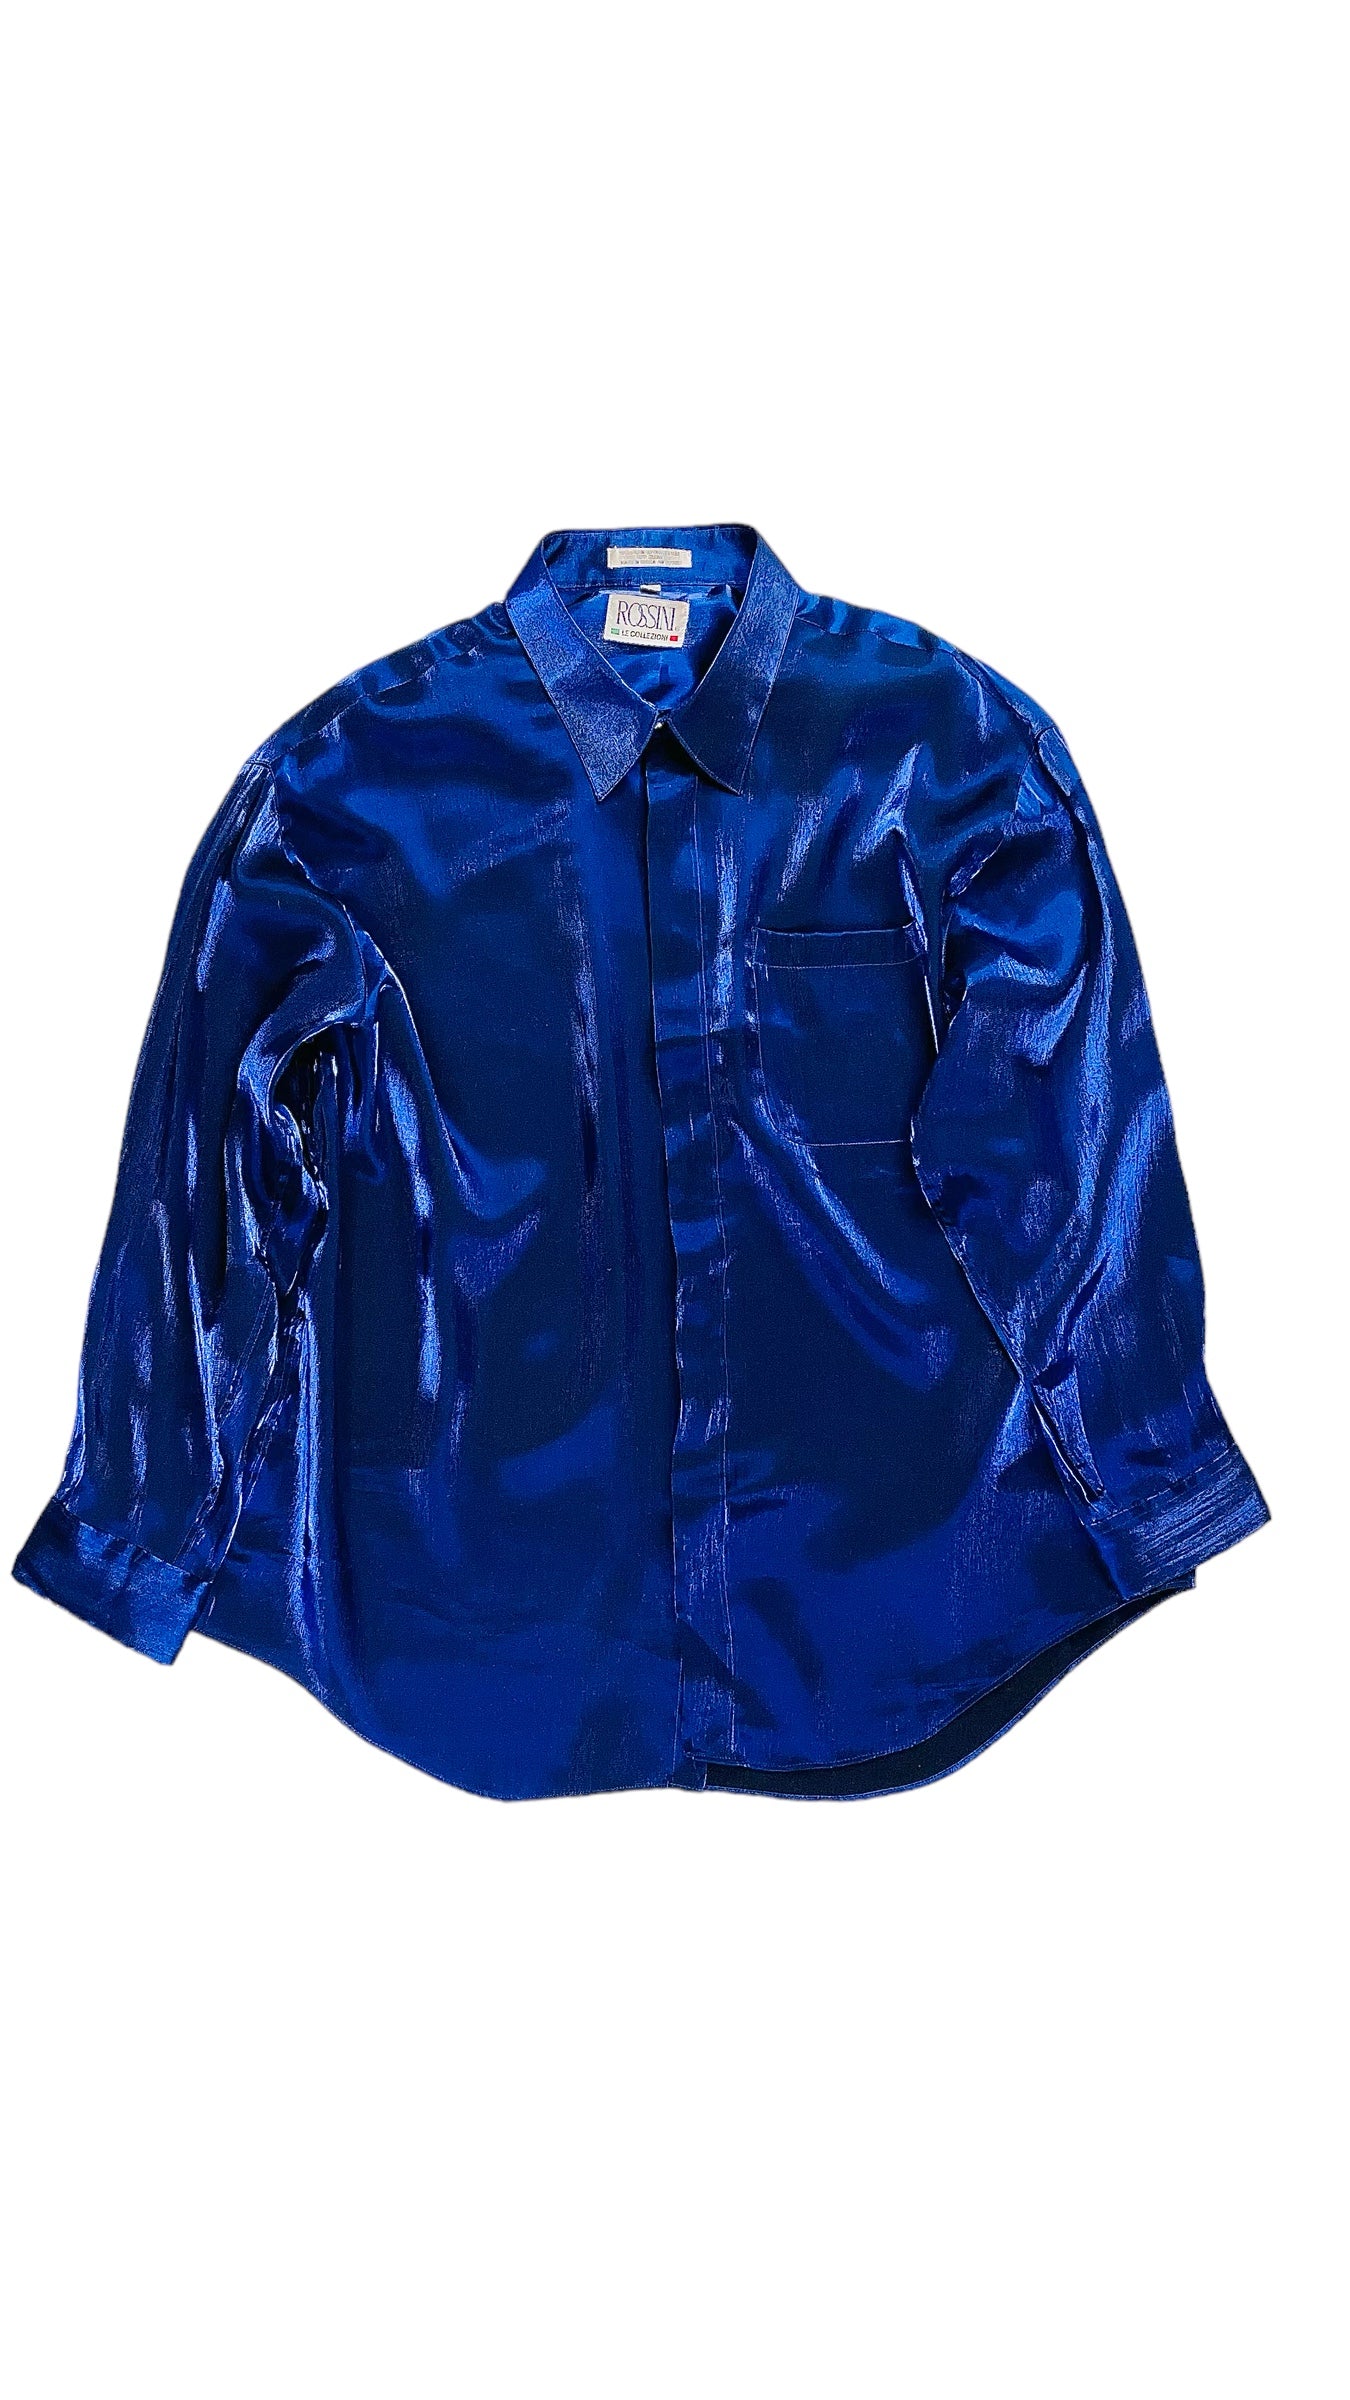 Vintage 90s metallic blue long sleeve button up top - Size 2XL